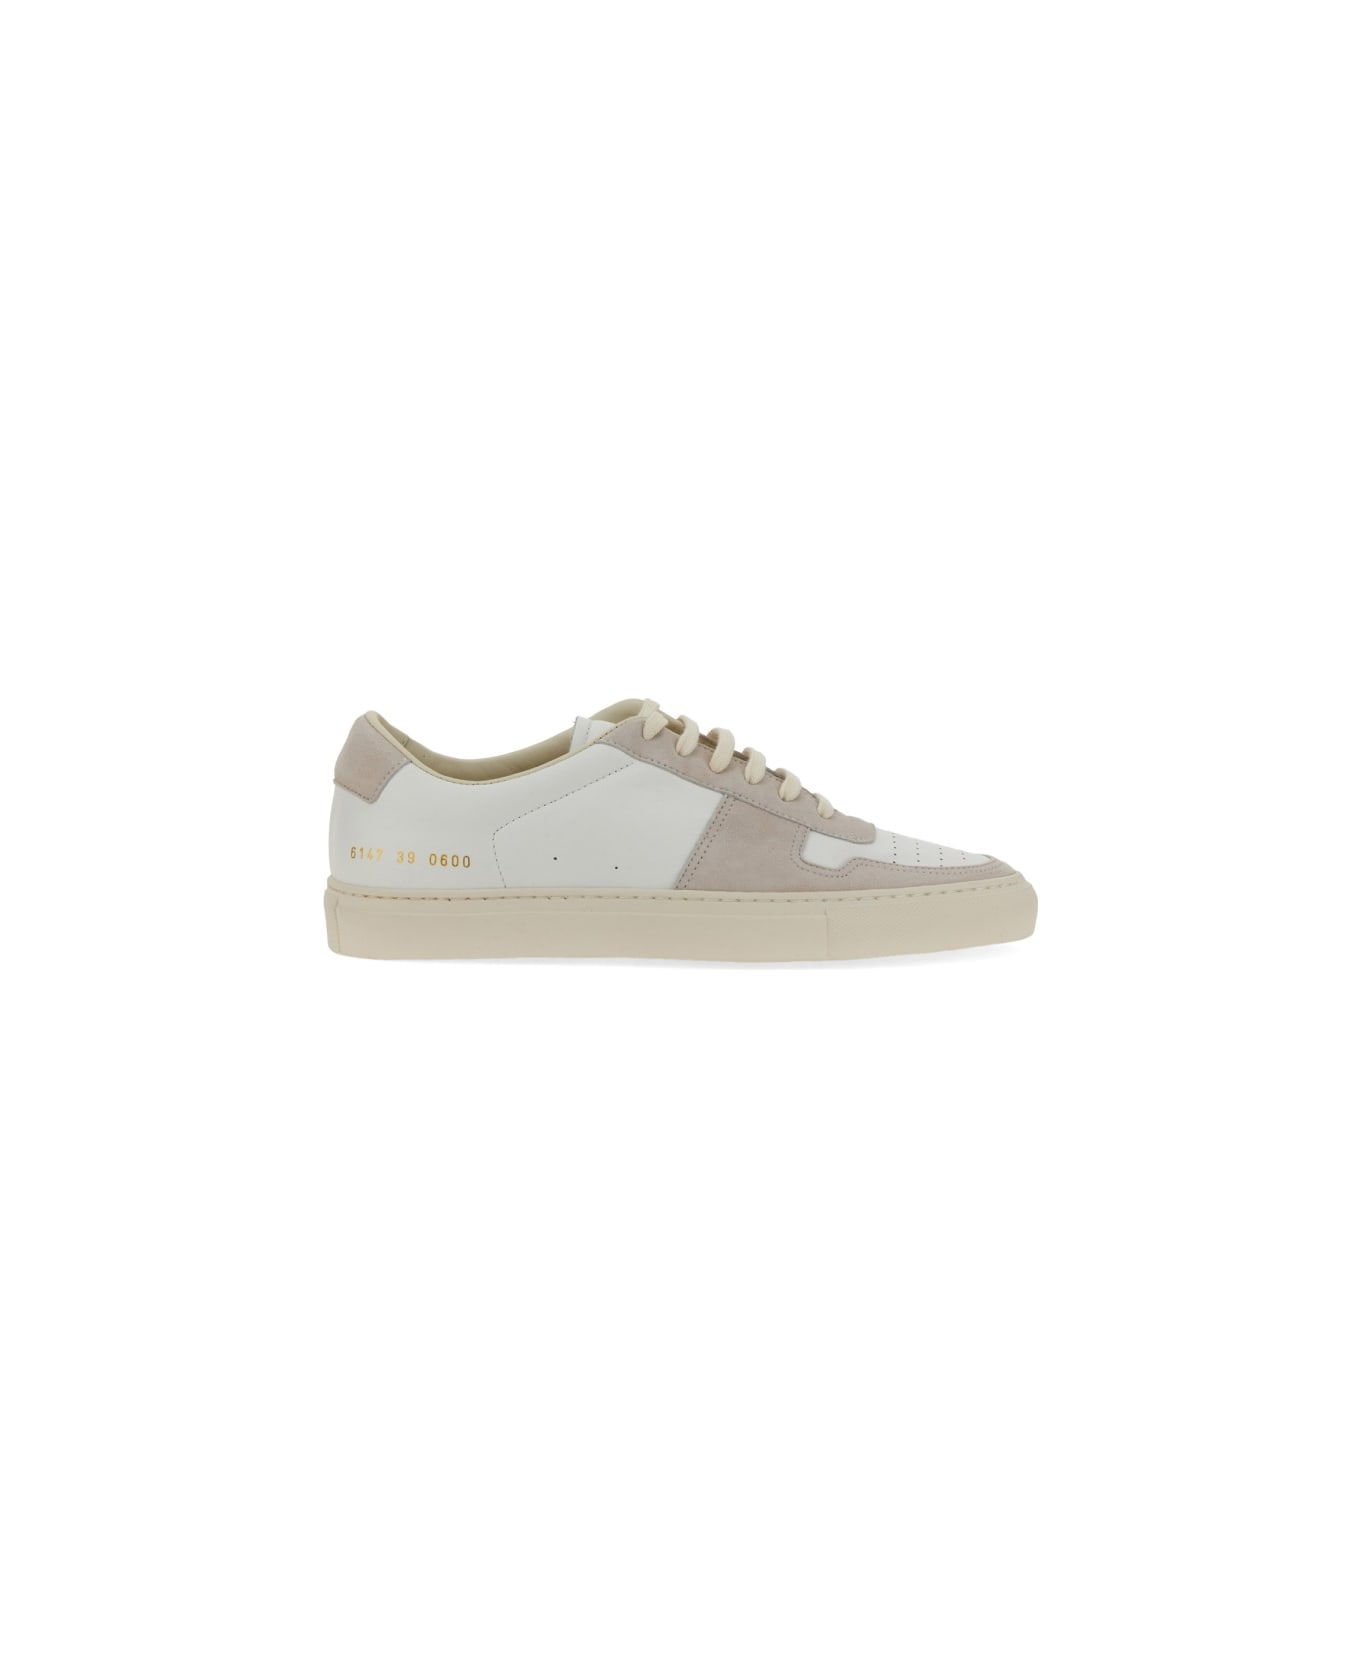 Common Projects "bball" Sneaker - NUDE